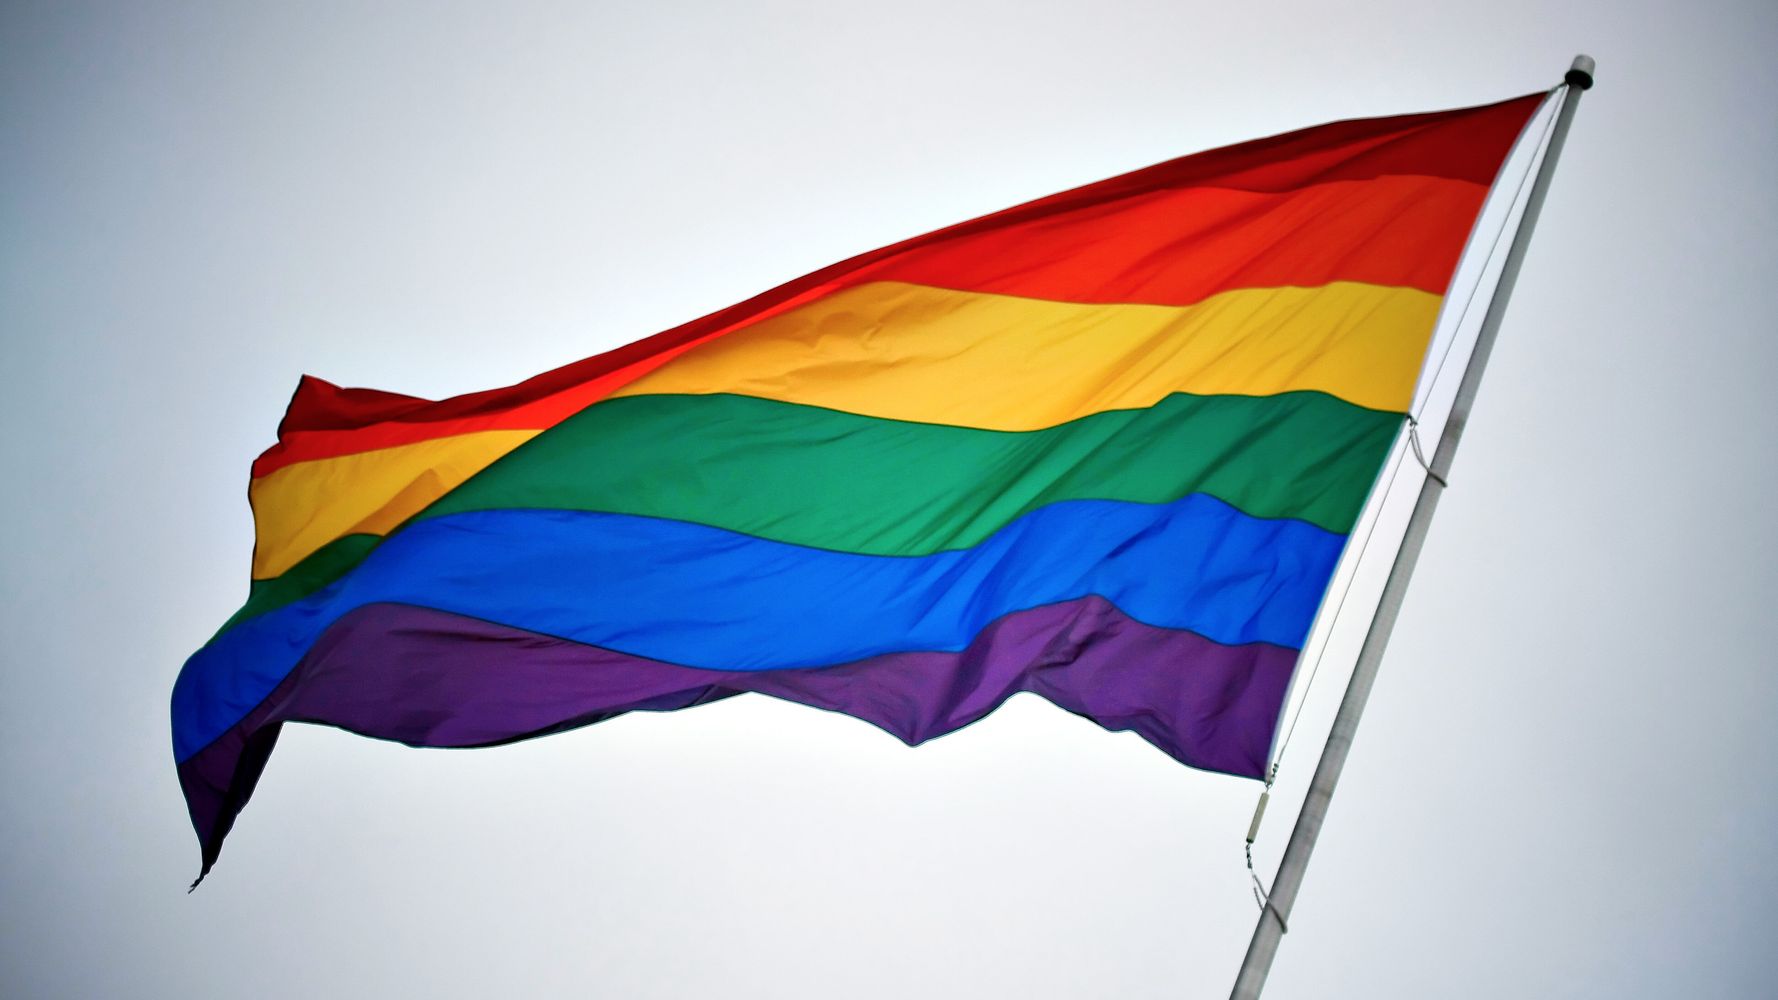 Man Who Tore Down Burned Lgbtq Flag Sentenced To 15 Years In Prison Huffpost Canada Crime 5415